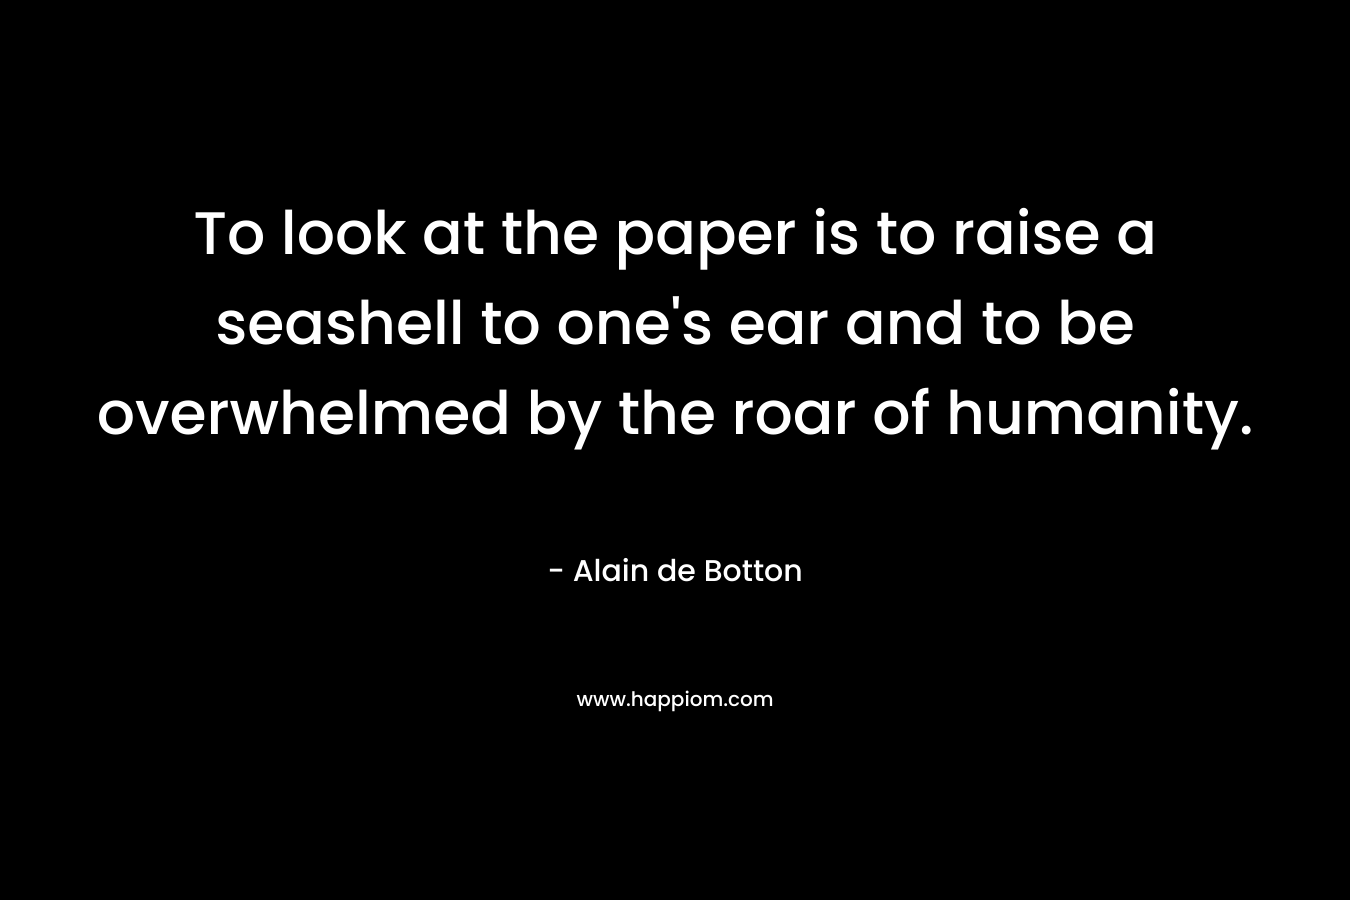 To look at the paper is to raise a seashell to one's ear and to be overwhelmed by the roar of humanity.